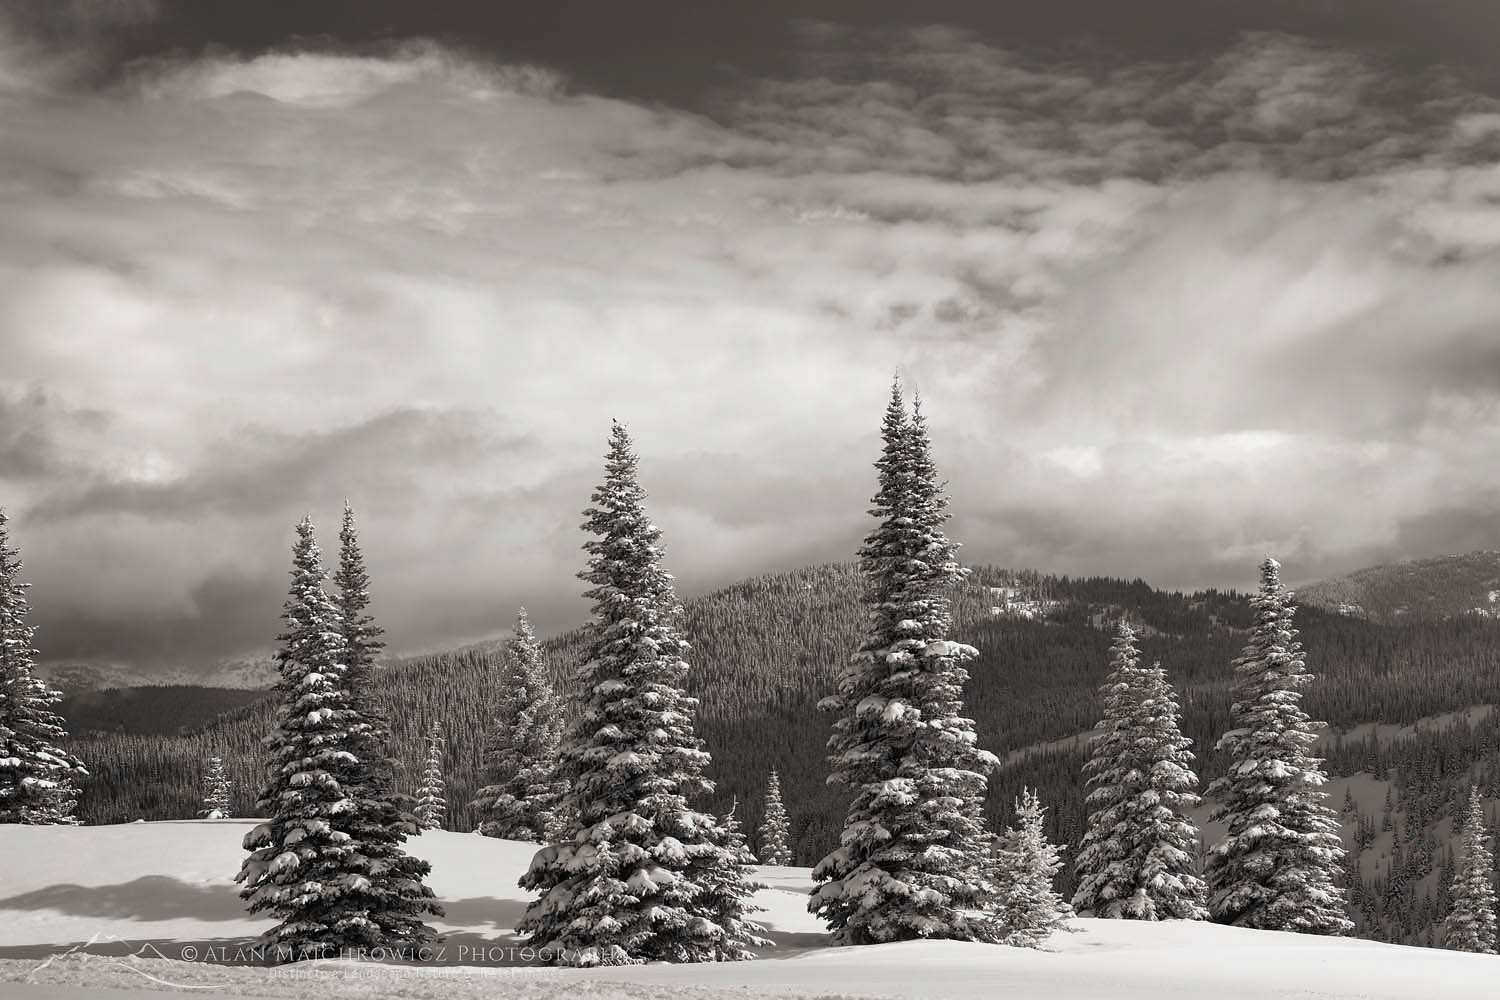 North Cascades in fresh winter snow. Manning Provincial Park British Columbia #64777bw